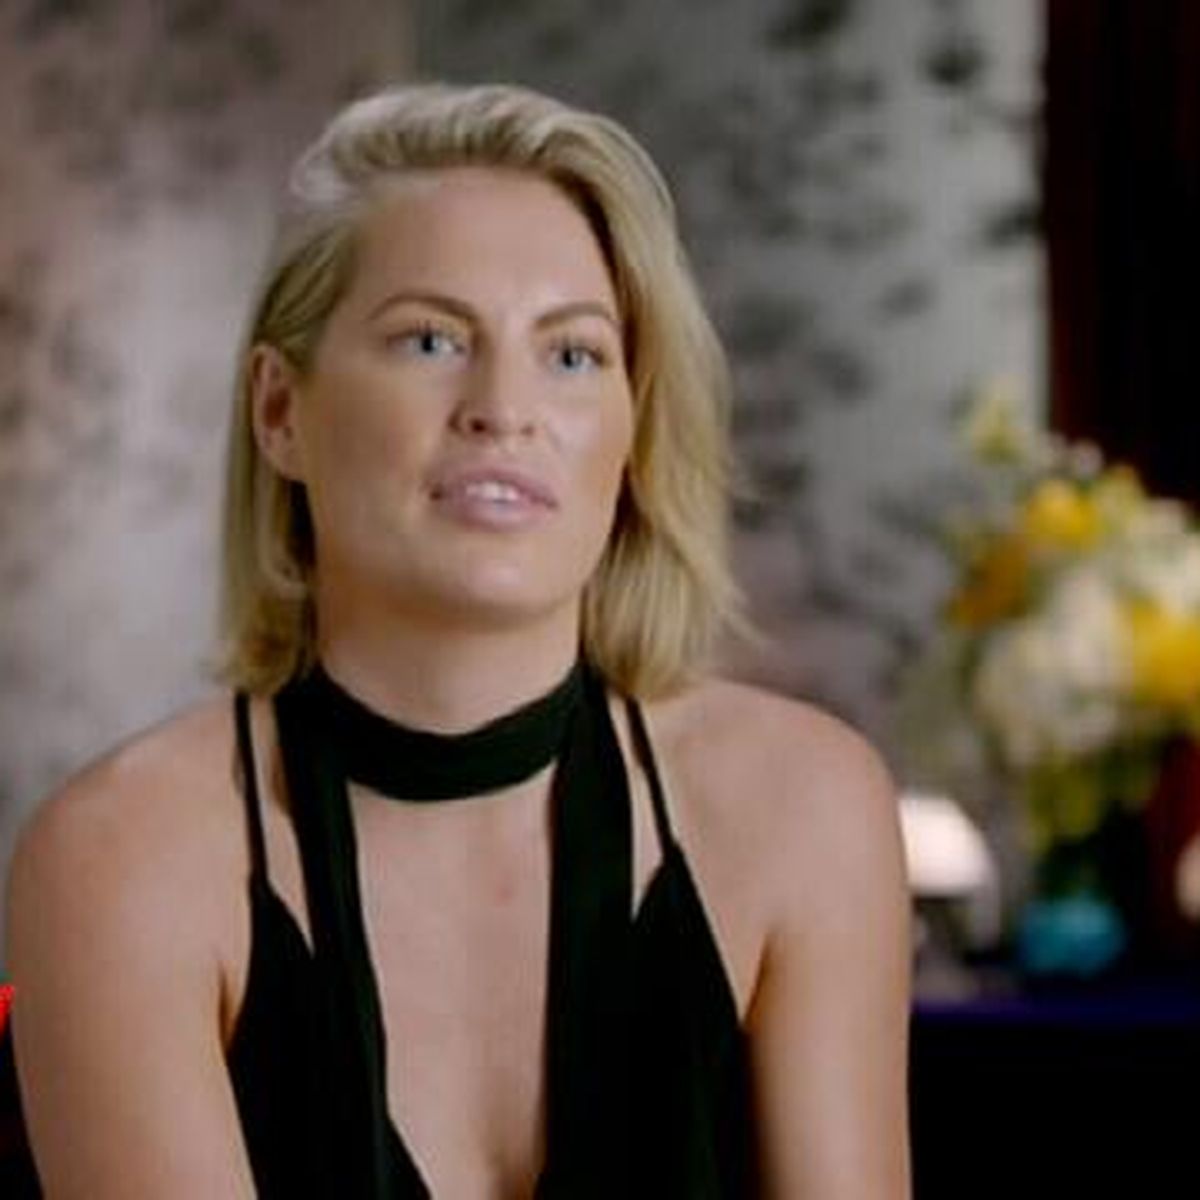 Bachelor reject Keira Maguire reveals a little more than she